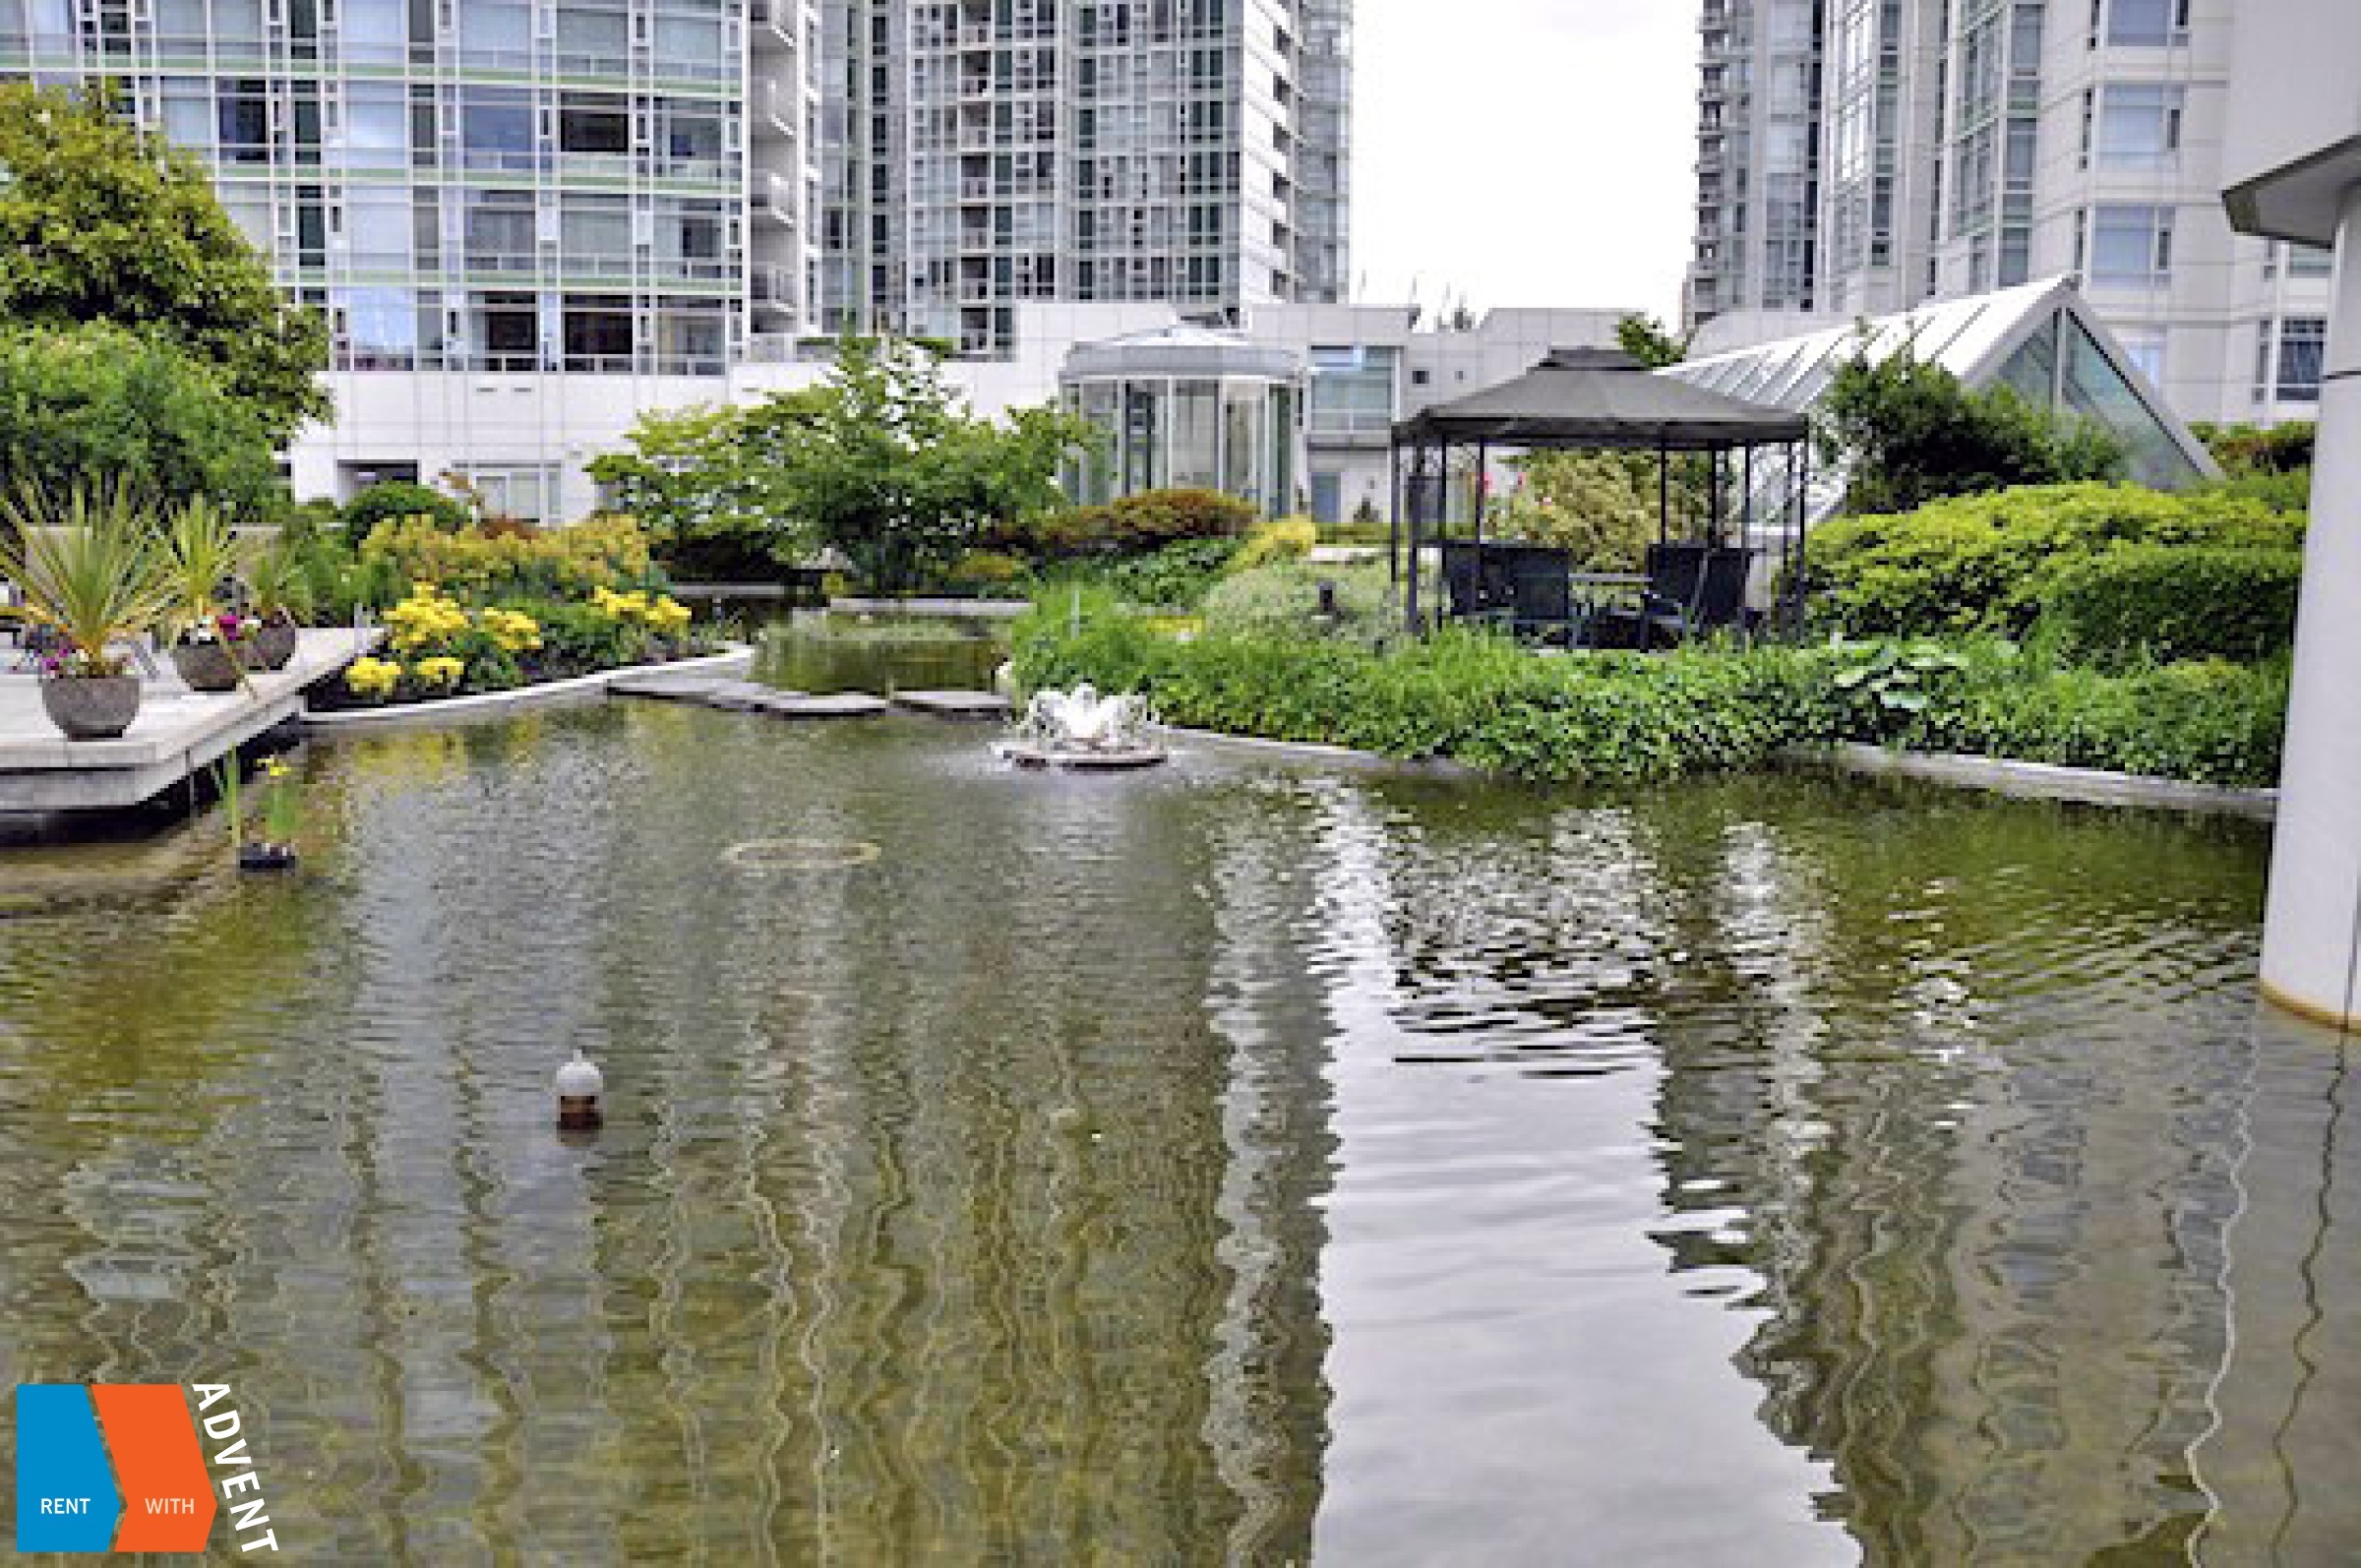 Aquarius lll Luxury 2 Bedroom Unfurnished Apartment For Rent in Yaletown. 1006 - 189 Davie Street, Vancouver, BC, Canada.